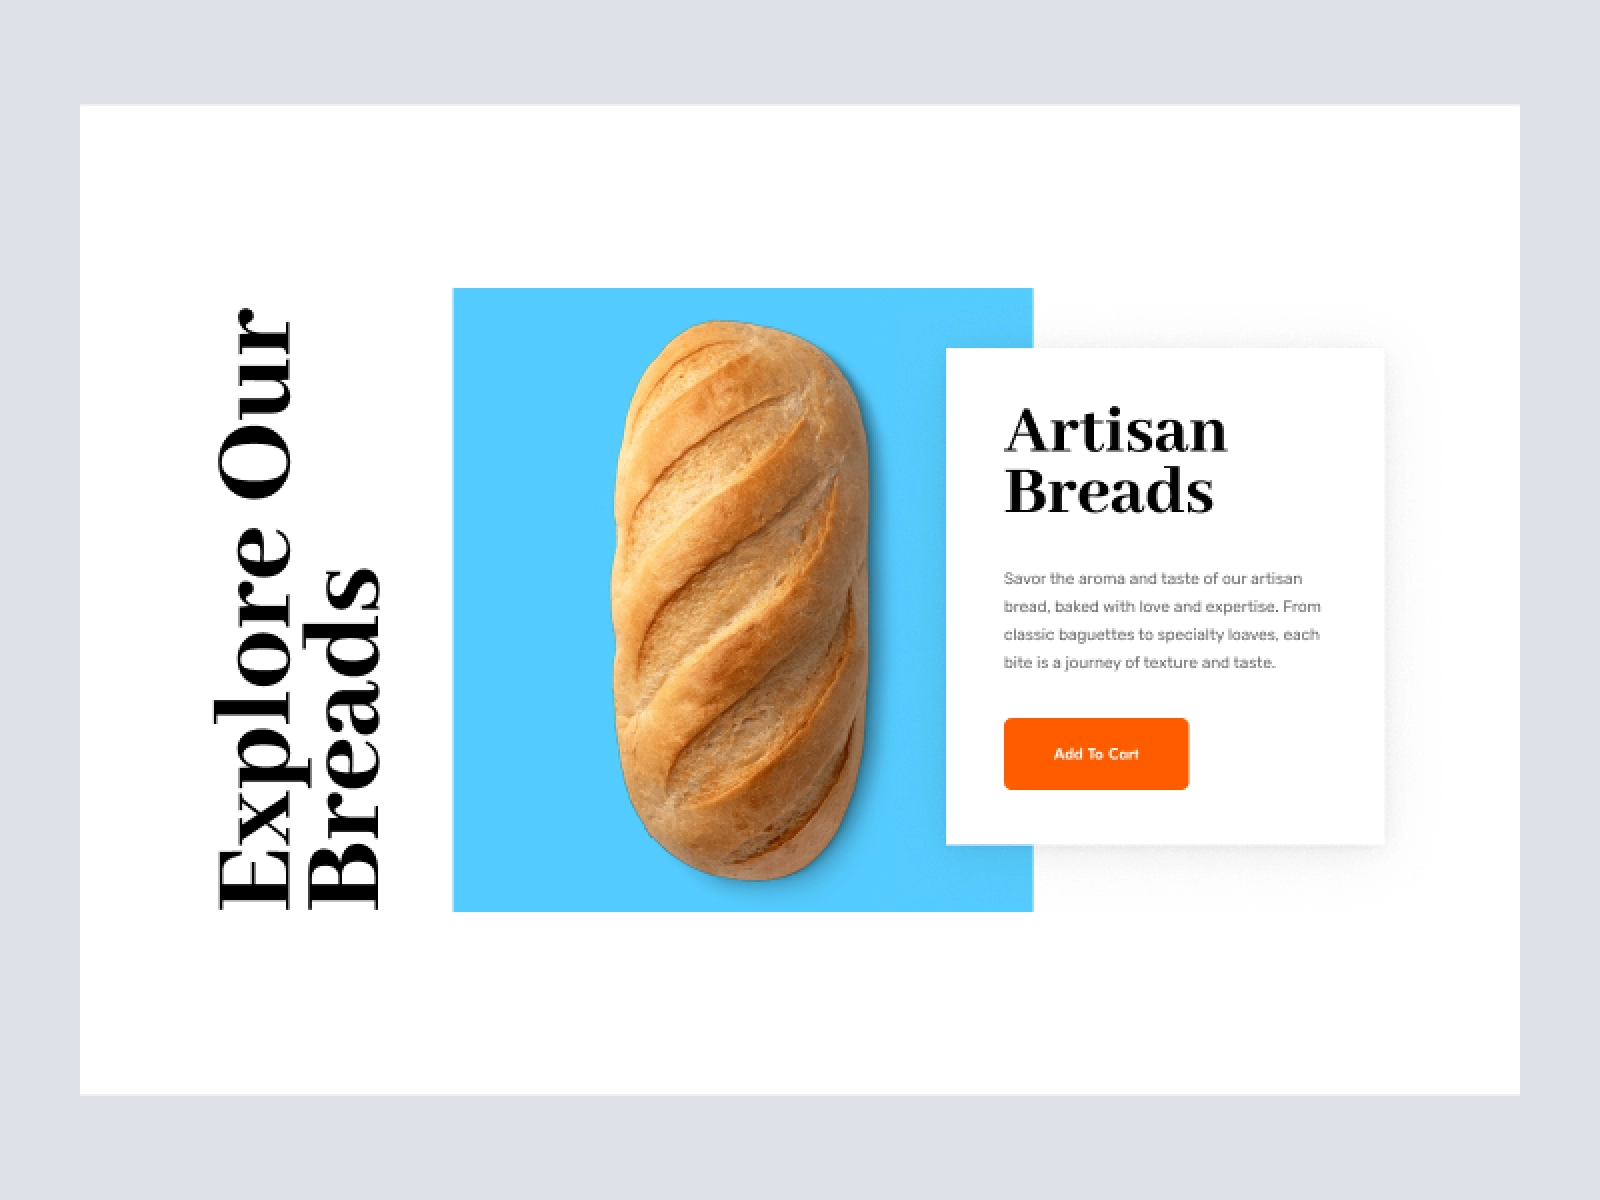 Bakery Shopify Store Design for Figma and Adobe XD - screen 2